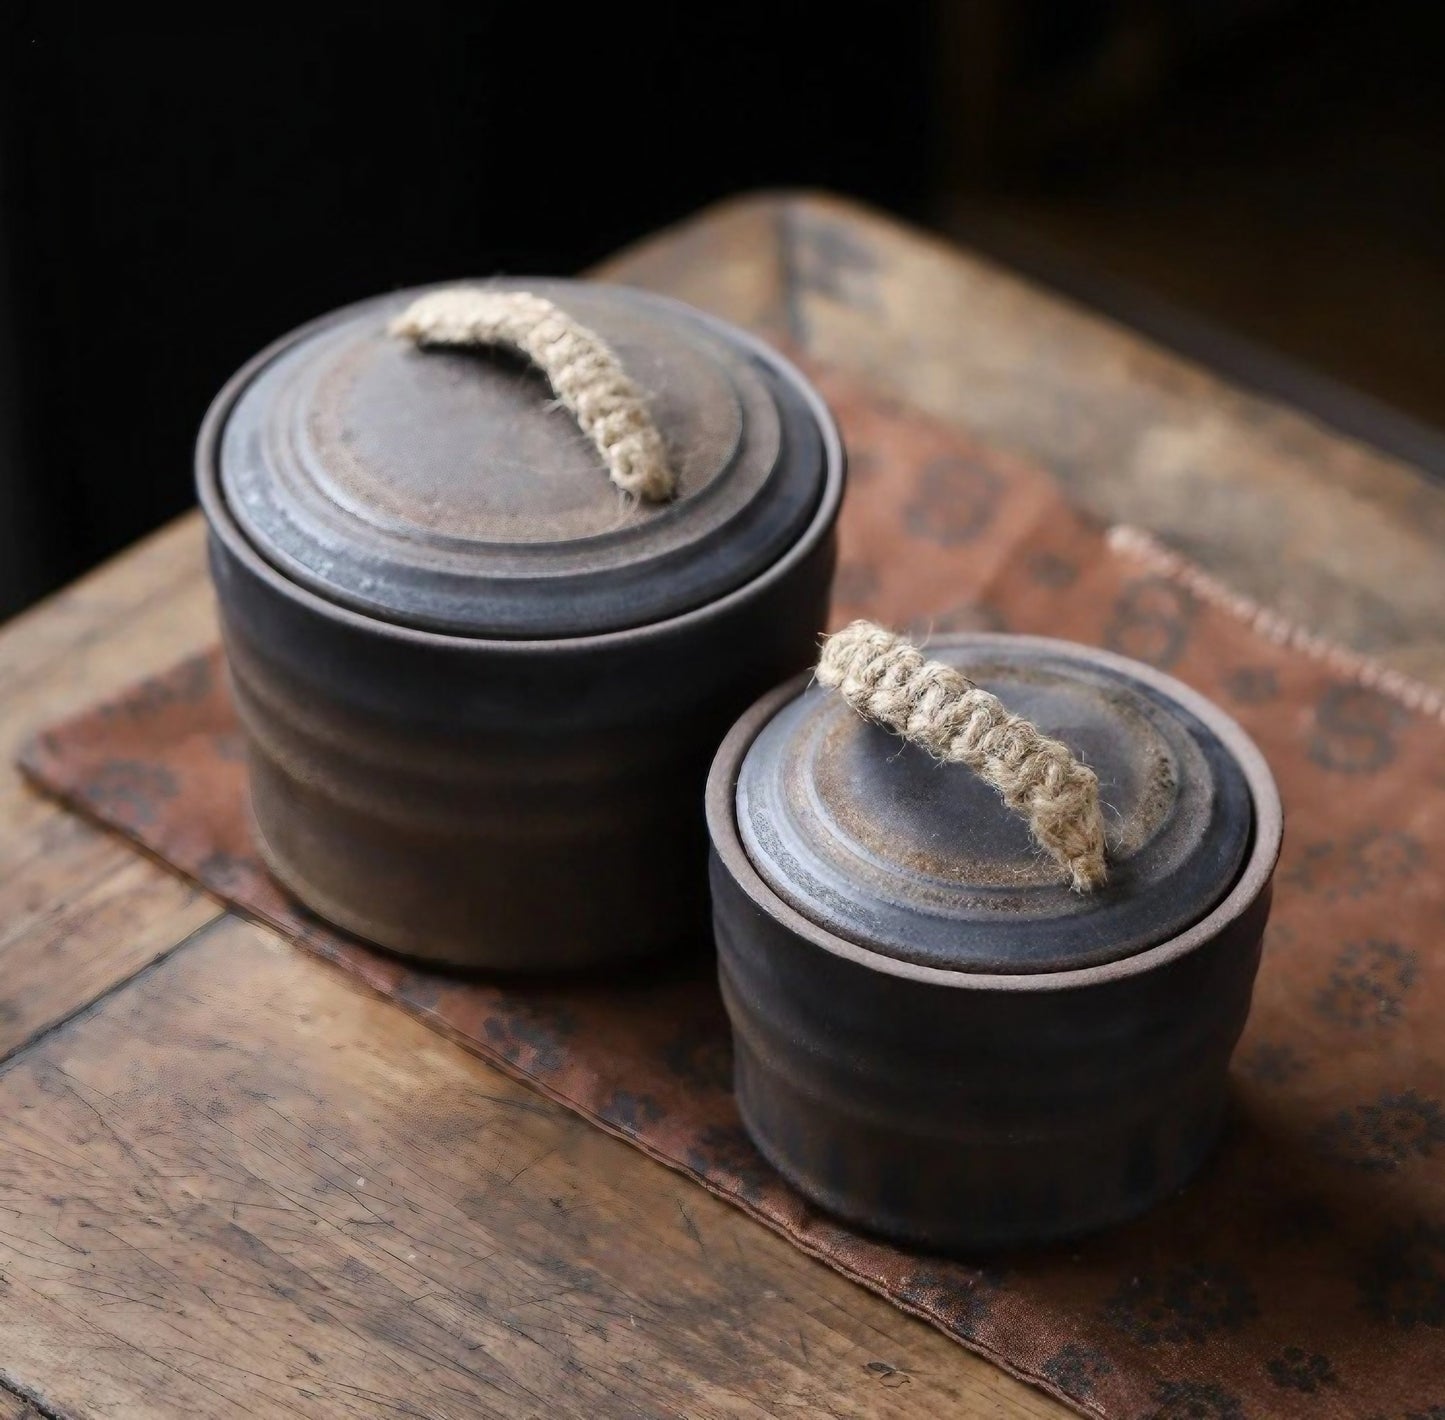  Two Wabi-Sabi Bucket Ceramic Jars with handles displayed on a wooden surface